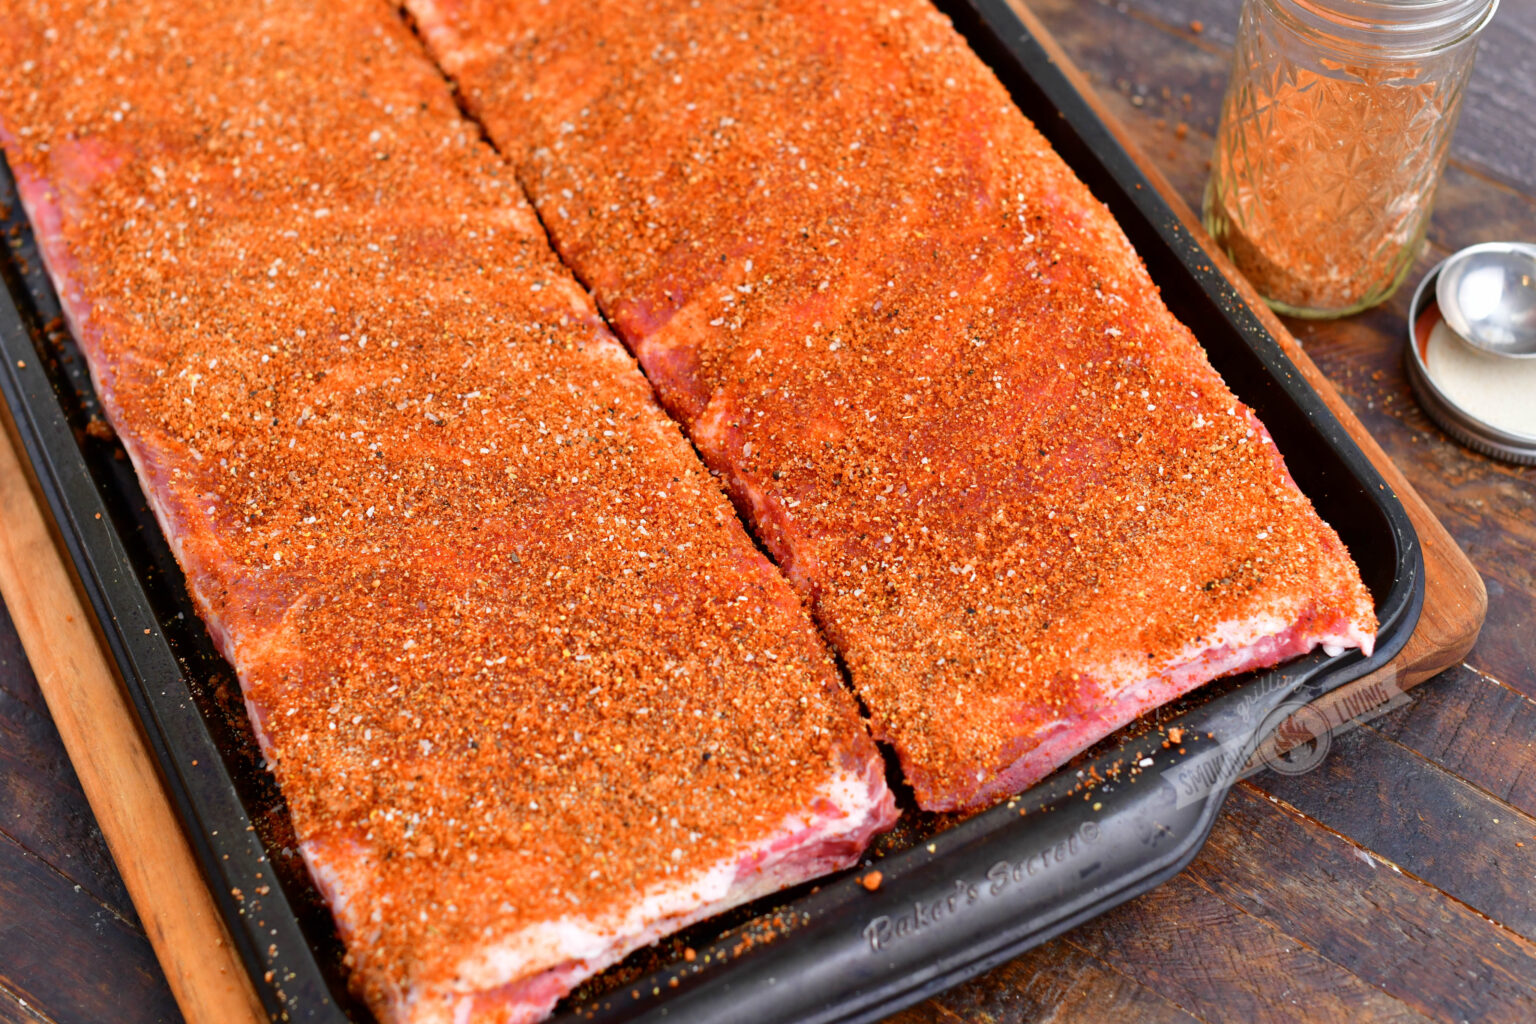 Dry Rub For Ribs - The Best Homemade Dry Rub For Your Ribs